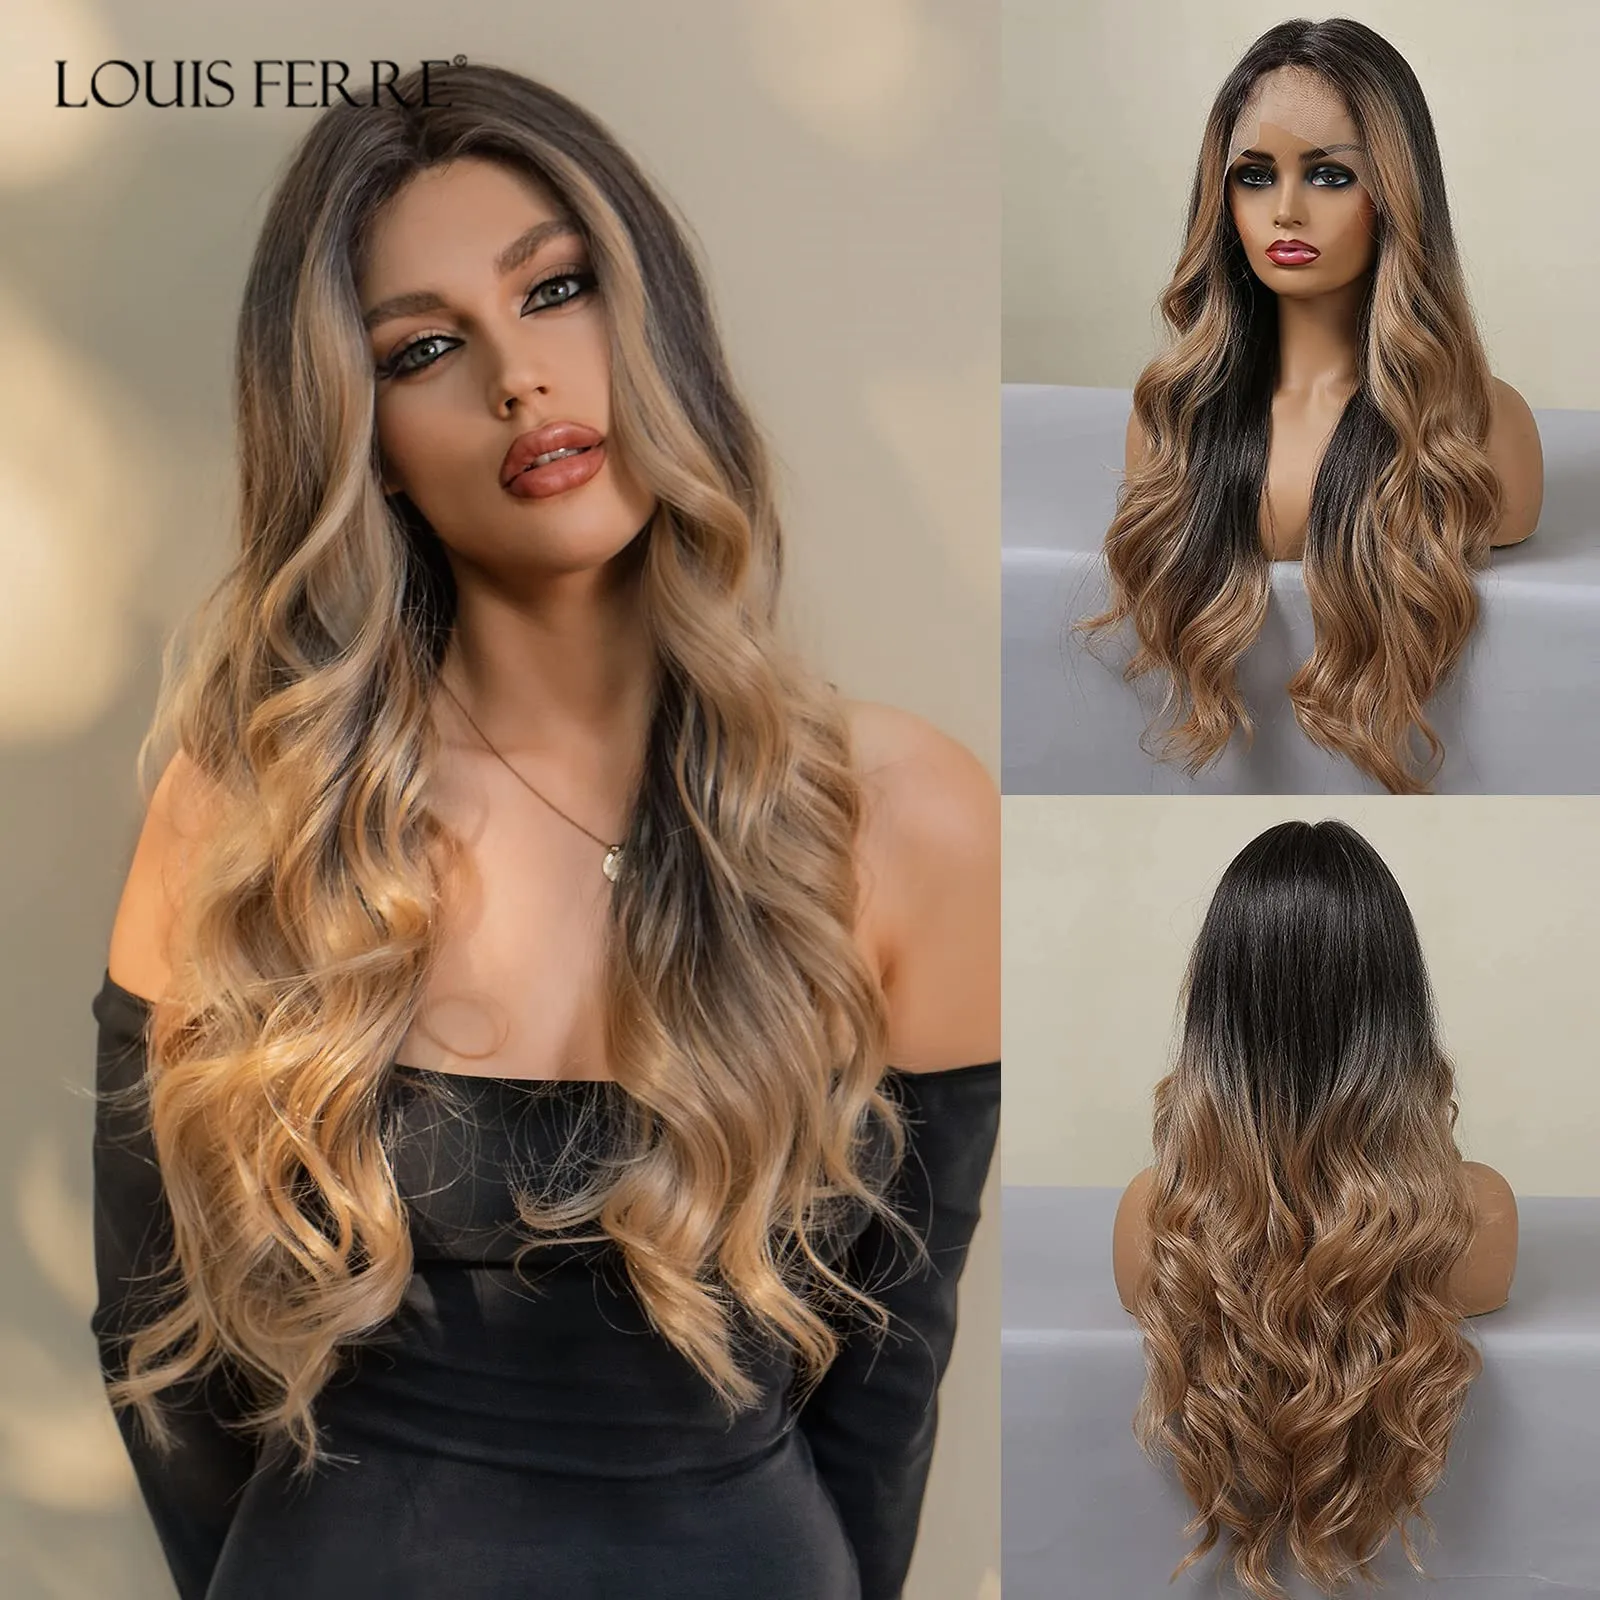 

LOUIS FERRE Long Ombre Blonde Lace Front Synthetic Wigs for Women Brown to Golden Natural Wavy Middle Parting Wig Heat Resistant